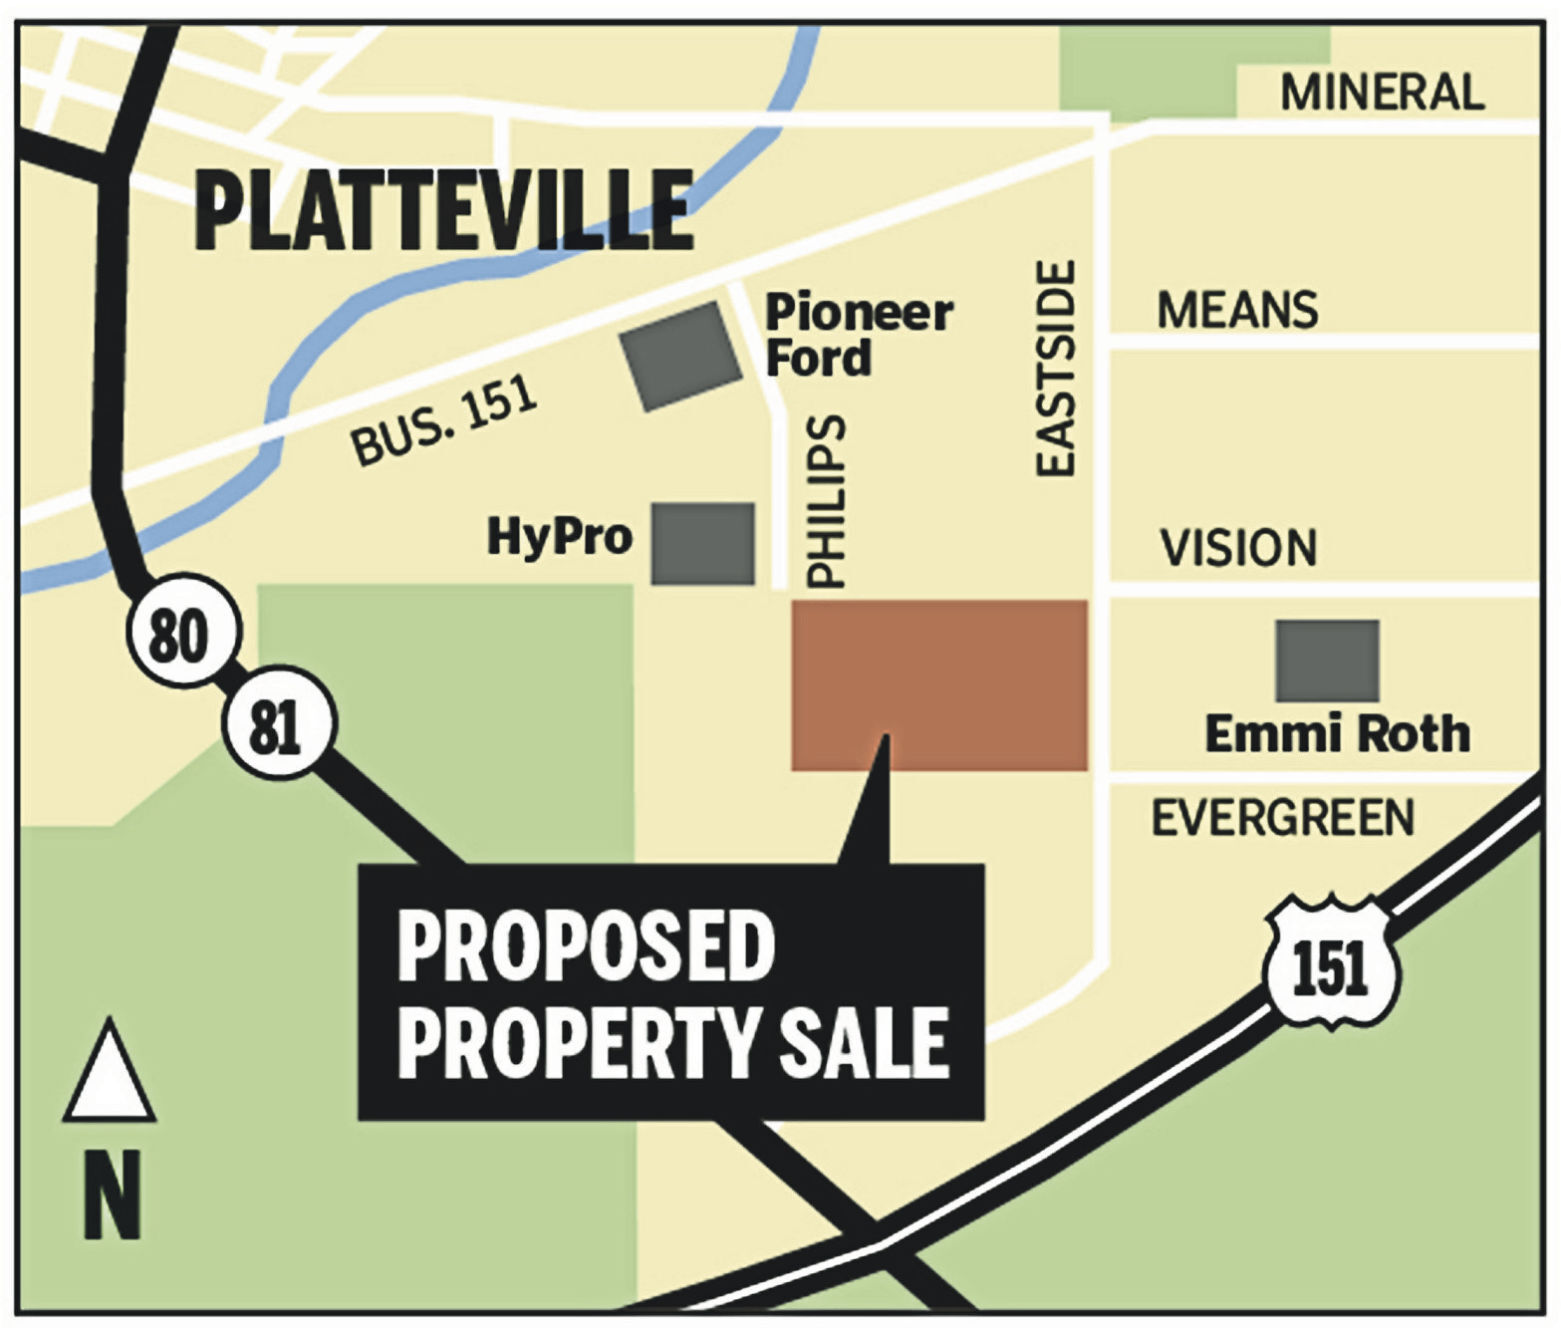 The Platteville Common Council is considering the sale of 20 acres of property for a 350,000-square-foot building to be built by a shell company for a confidential Fortune 500 client. PHOTO CREDIT: Mike Day